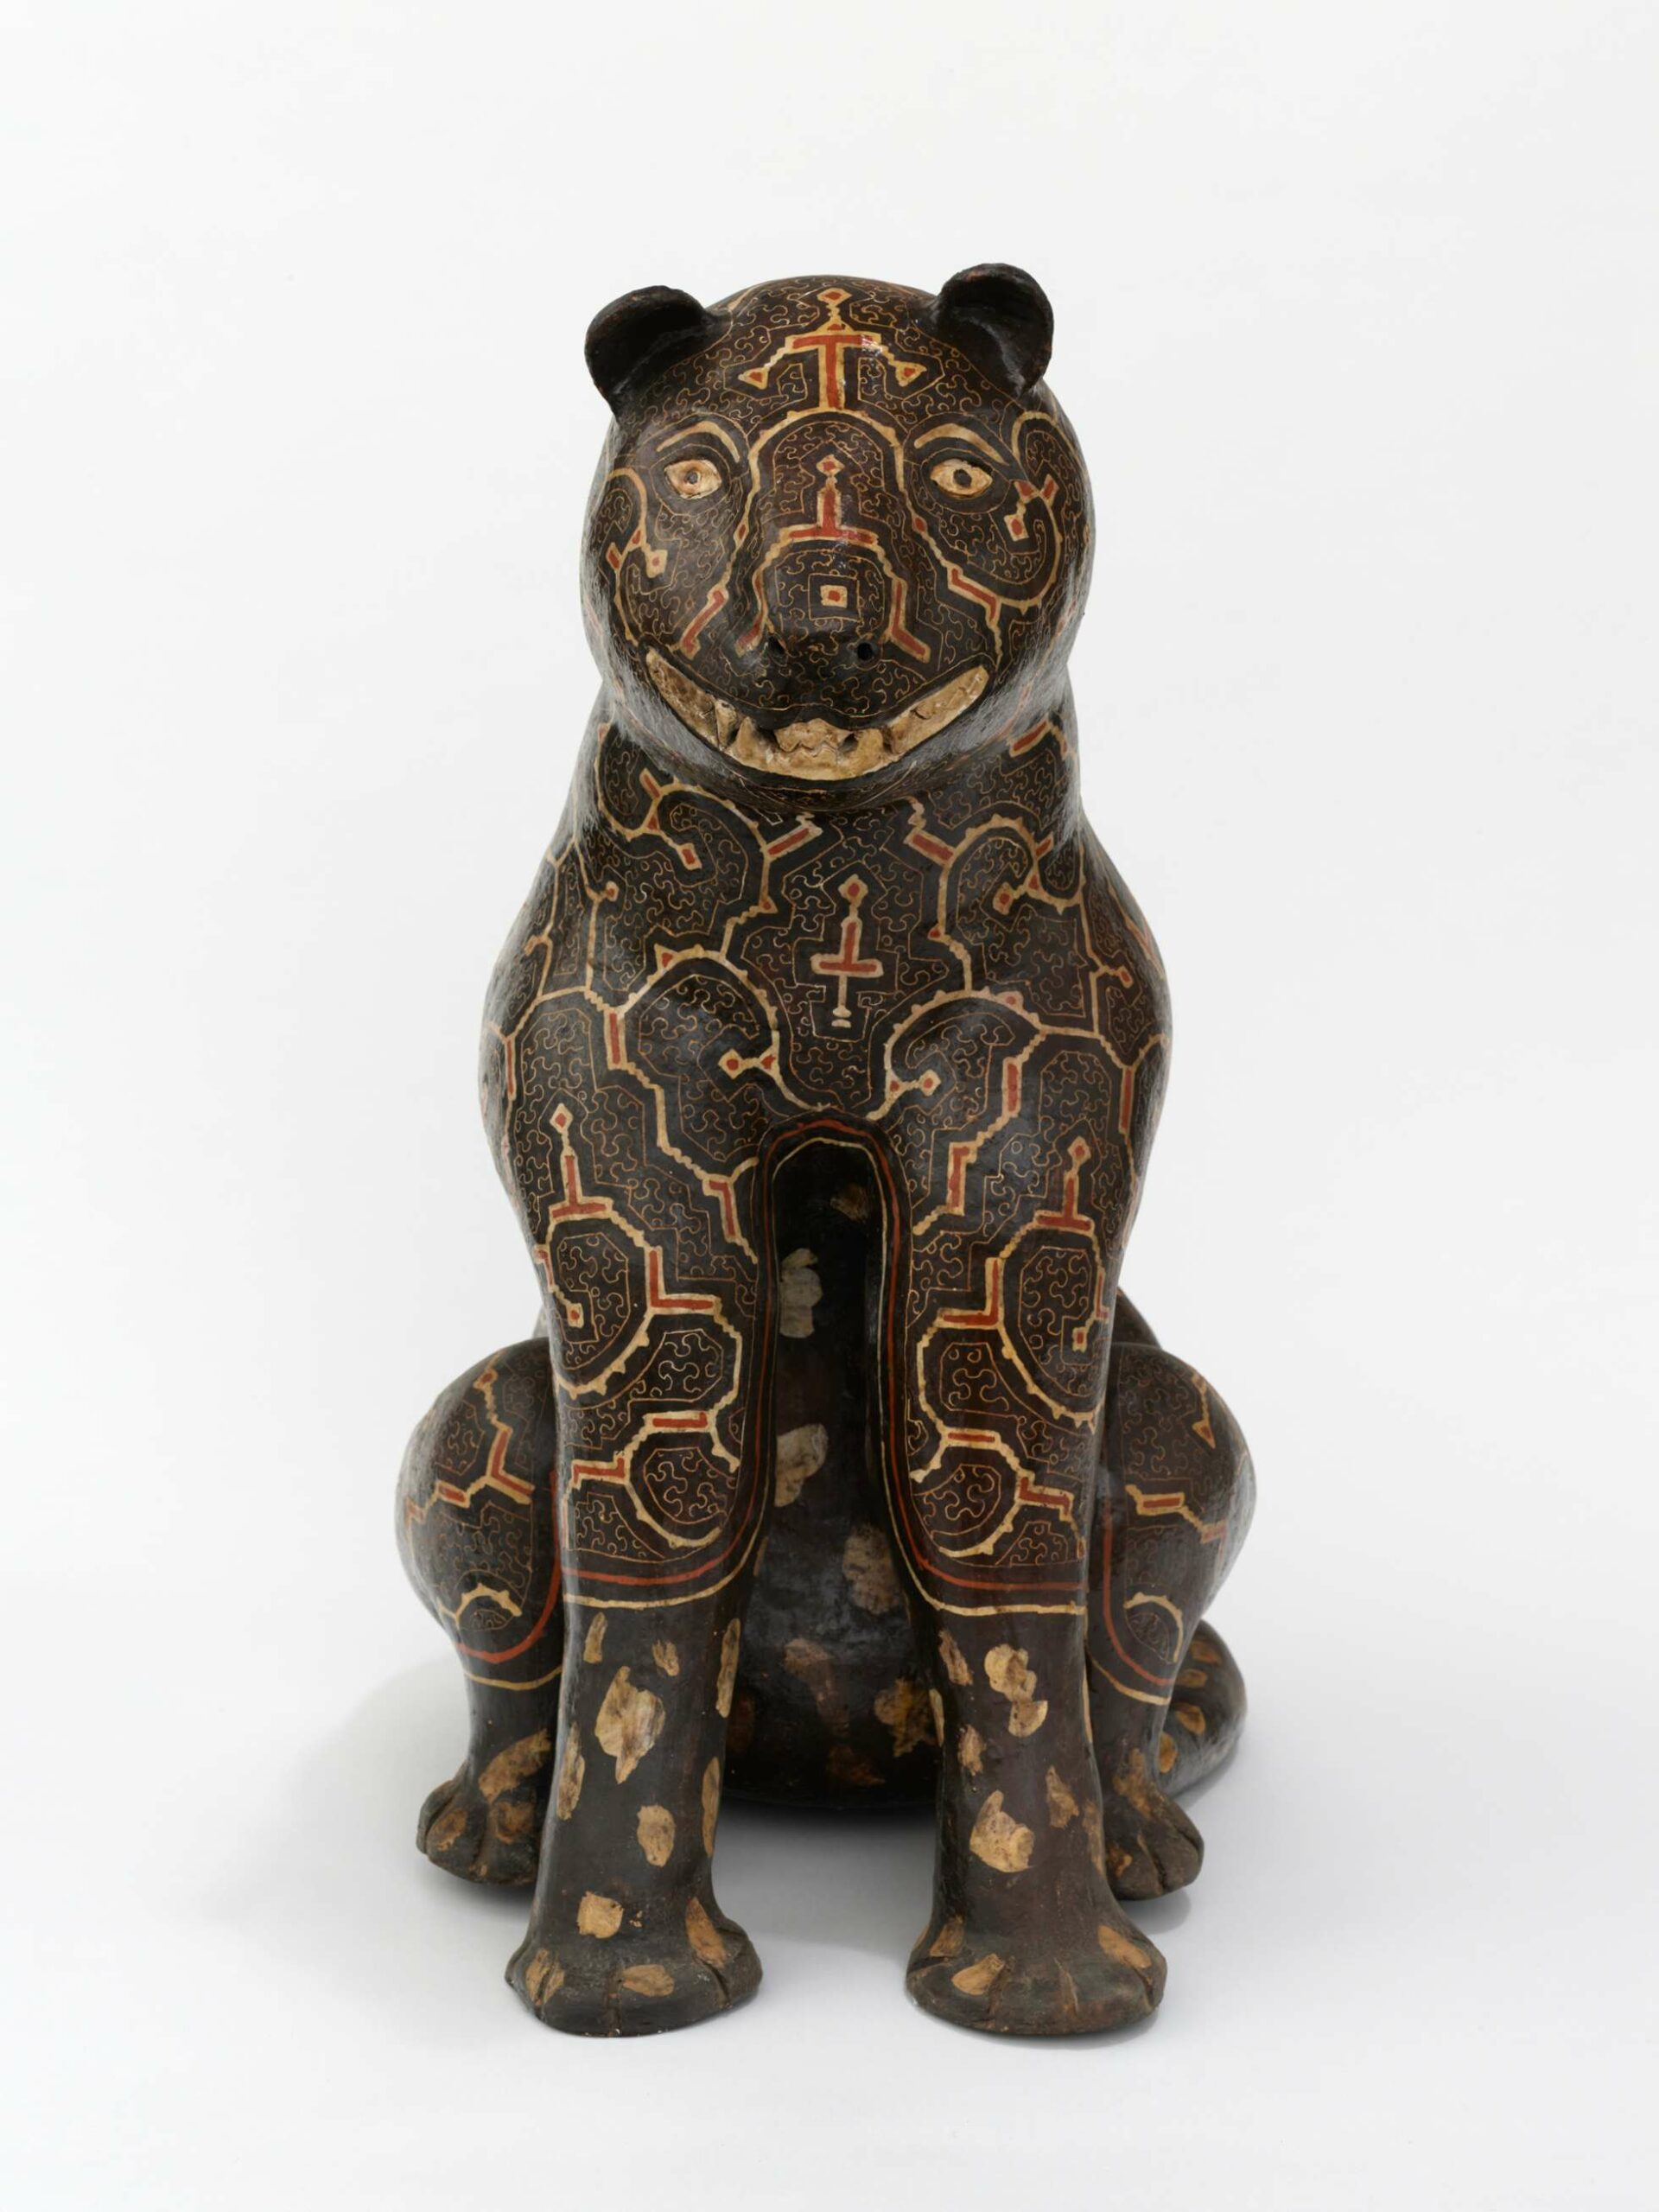 A ceramic sculpture of a black jaguar sitting on its hind legs. The body of the jaguar is etched with rounded geometric patterns in beige and terracotta red.